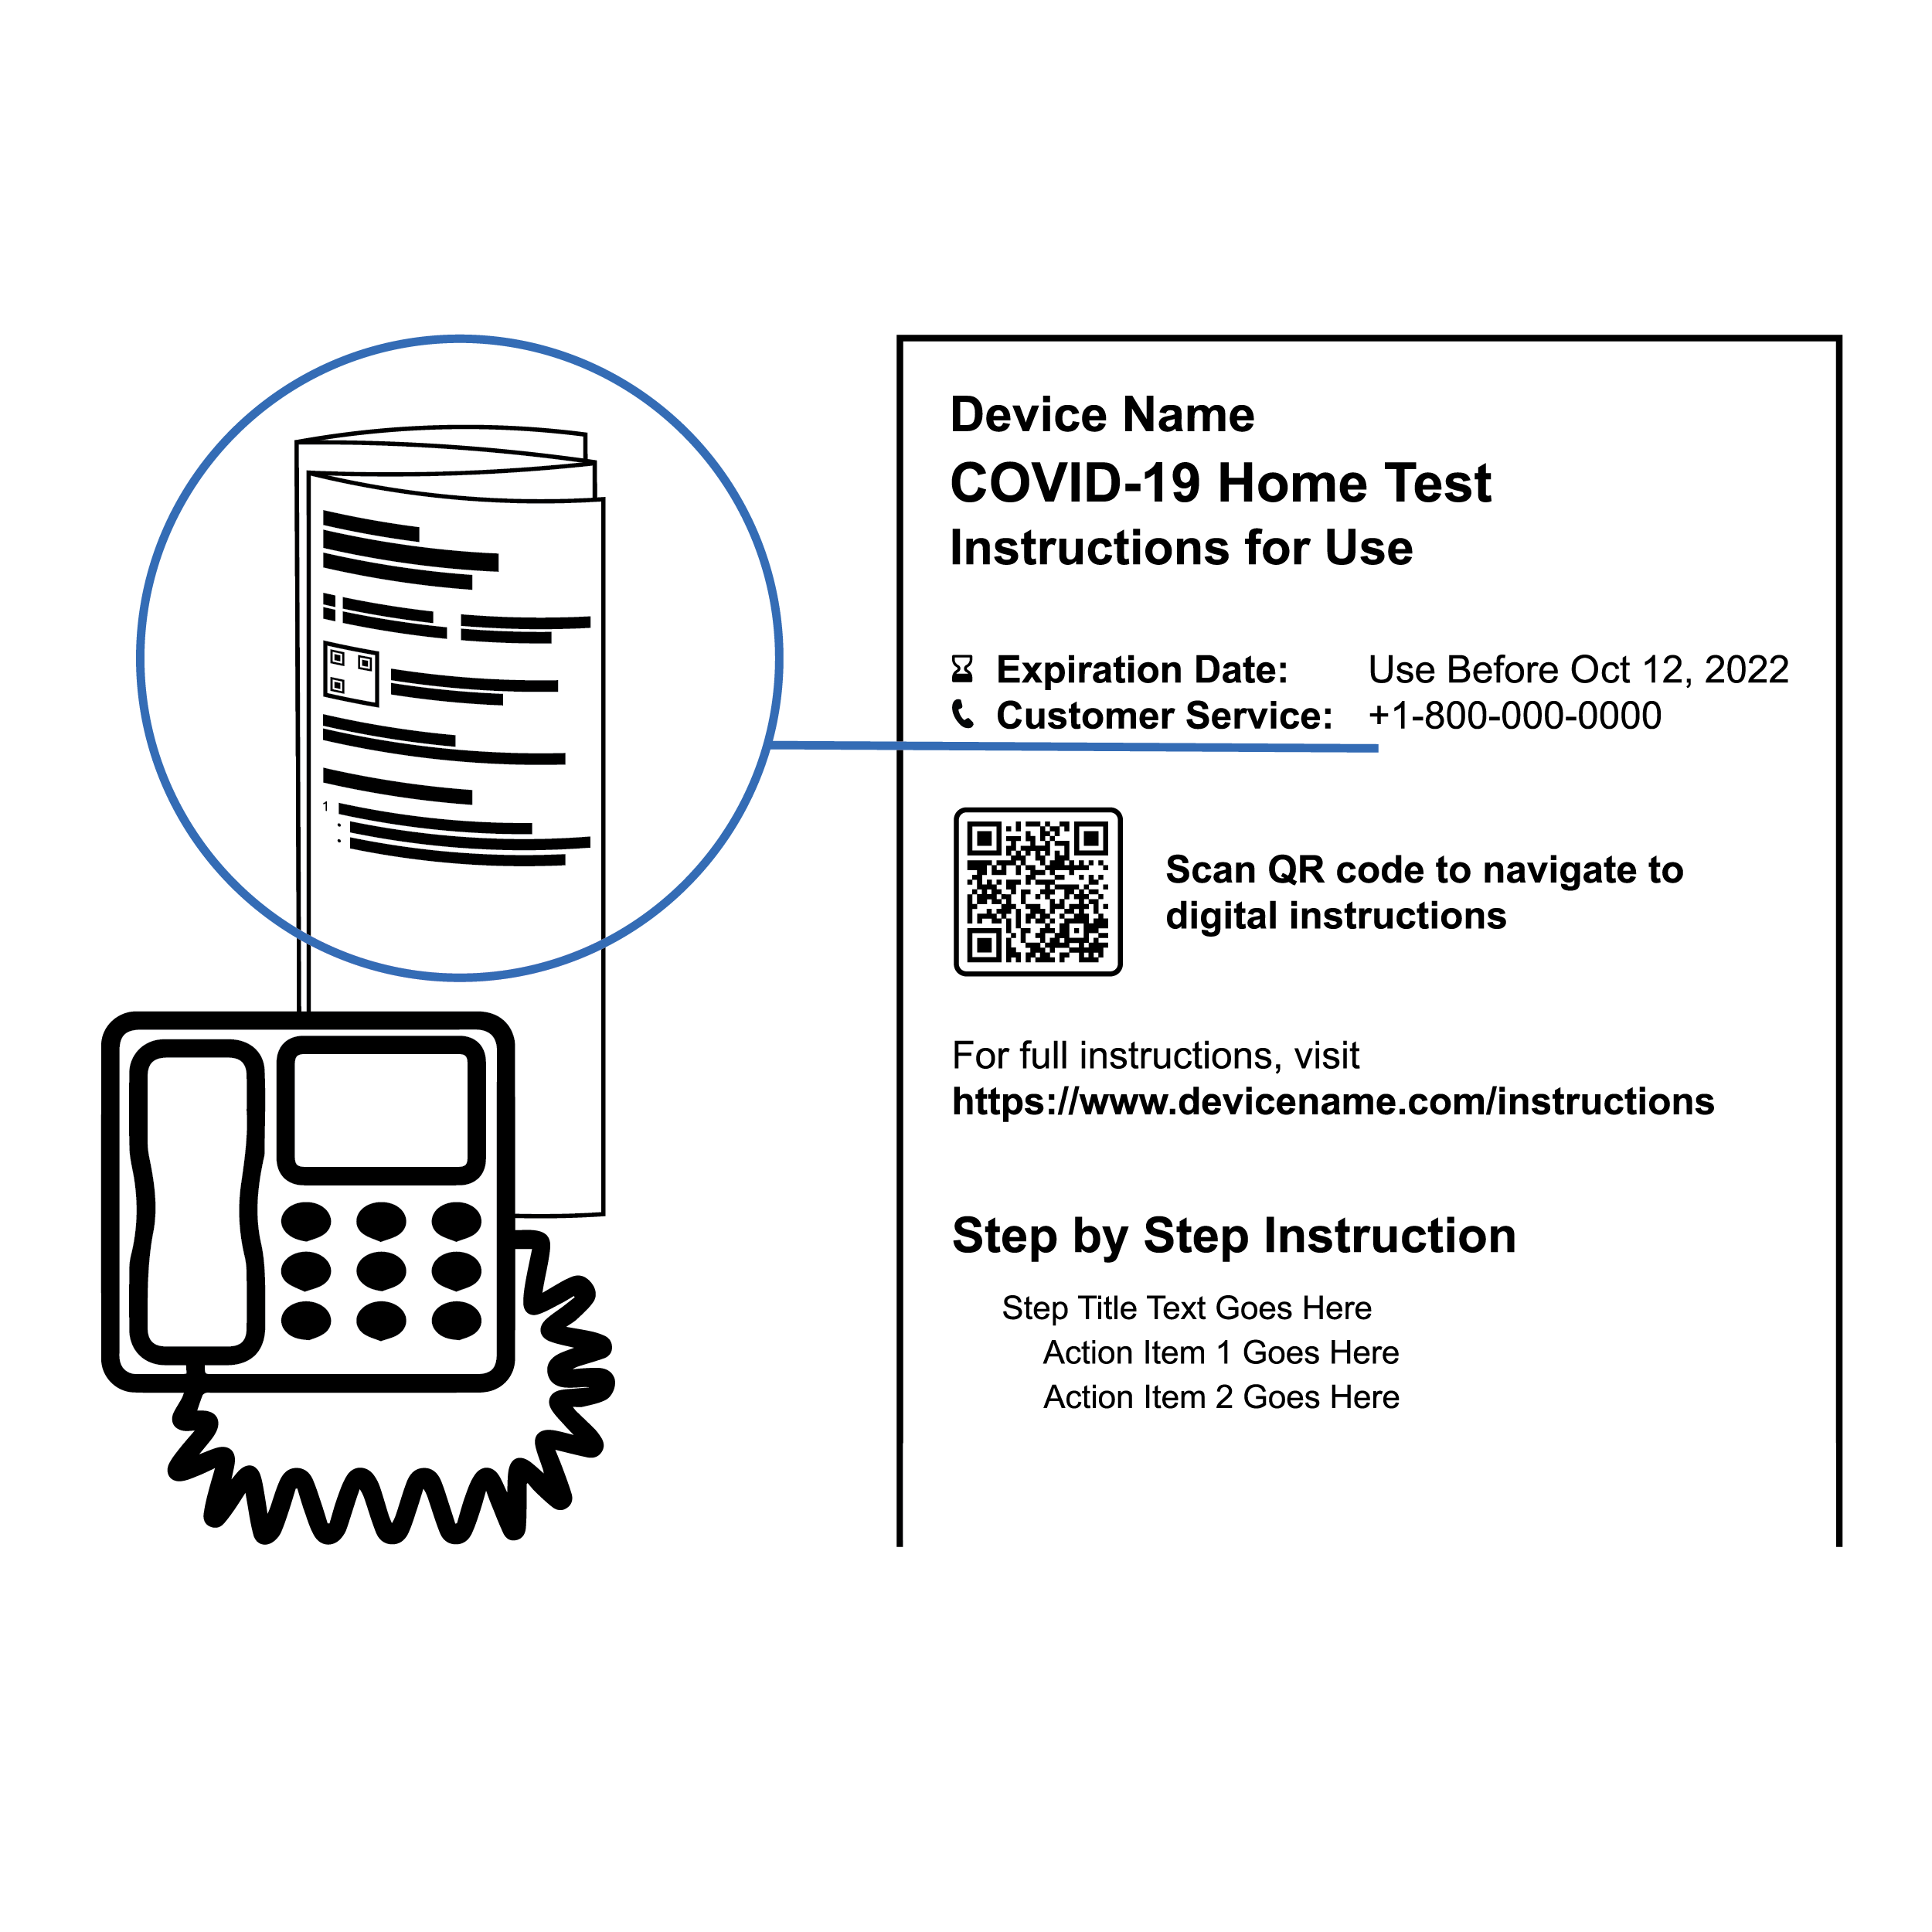 Test instructions that include a customer service phone number with a phone symbol next to it for accessing information via IVR system.